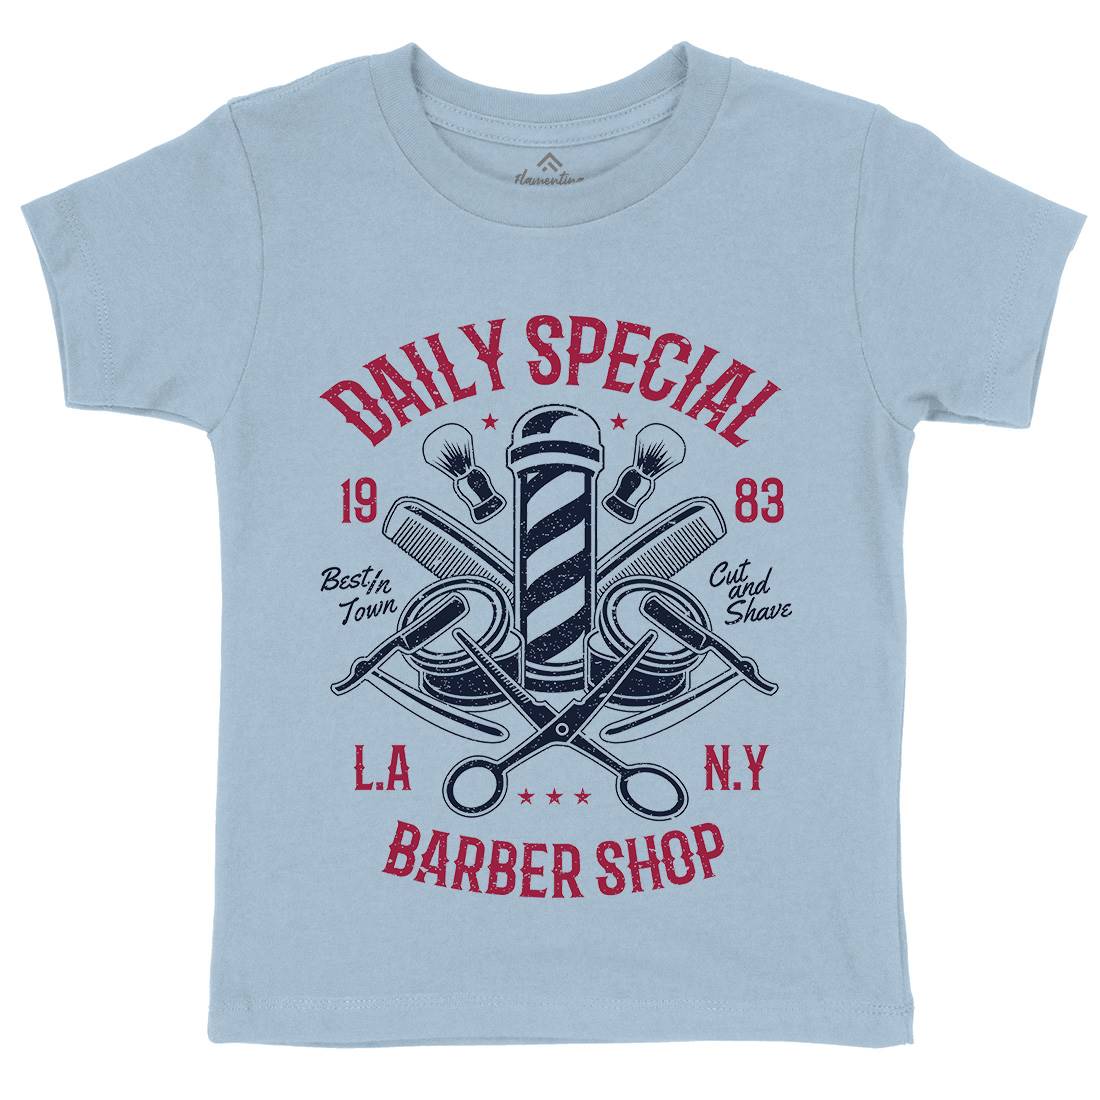 Daily Special Shop Kids Organic Crew Neck T-Shirt Barber A041